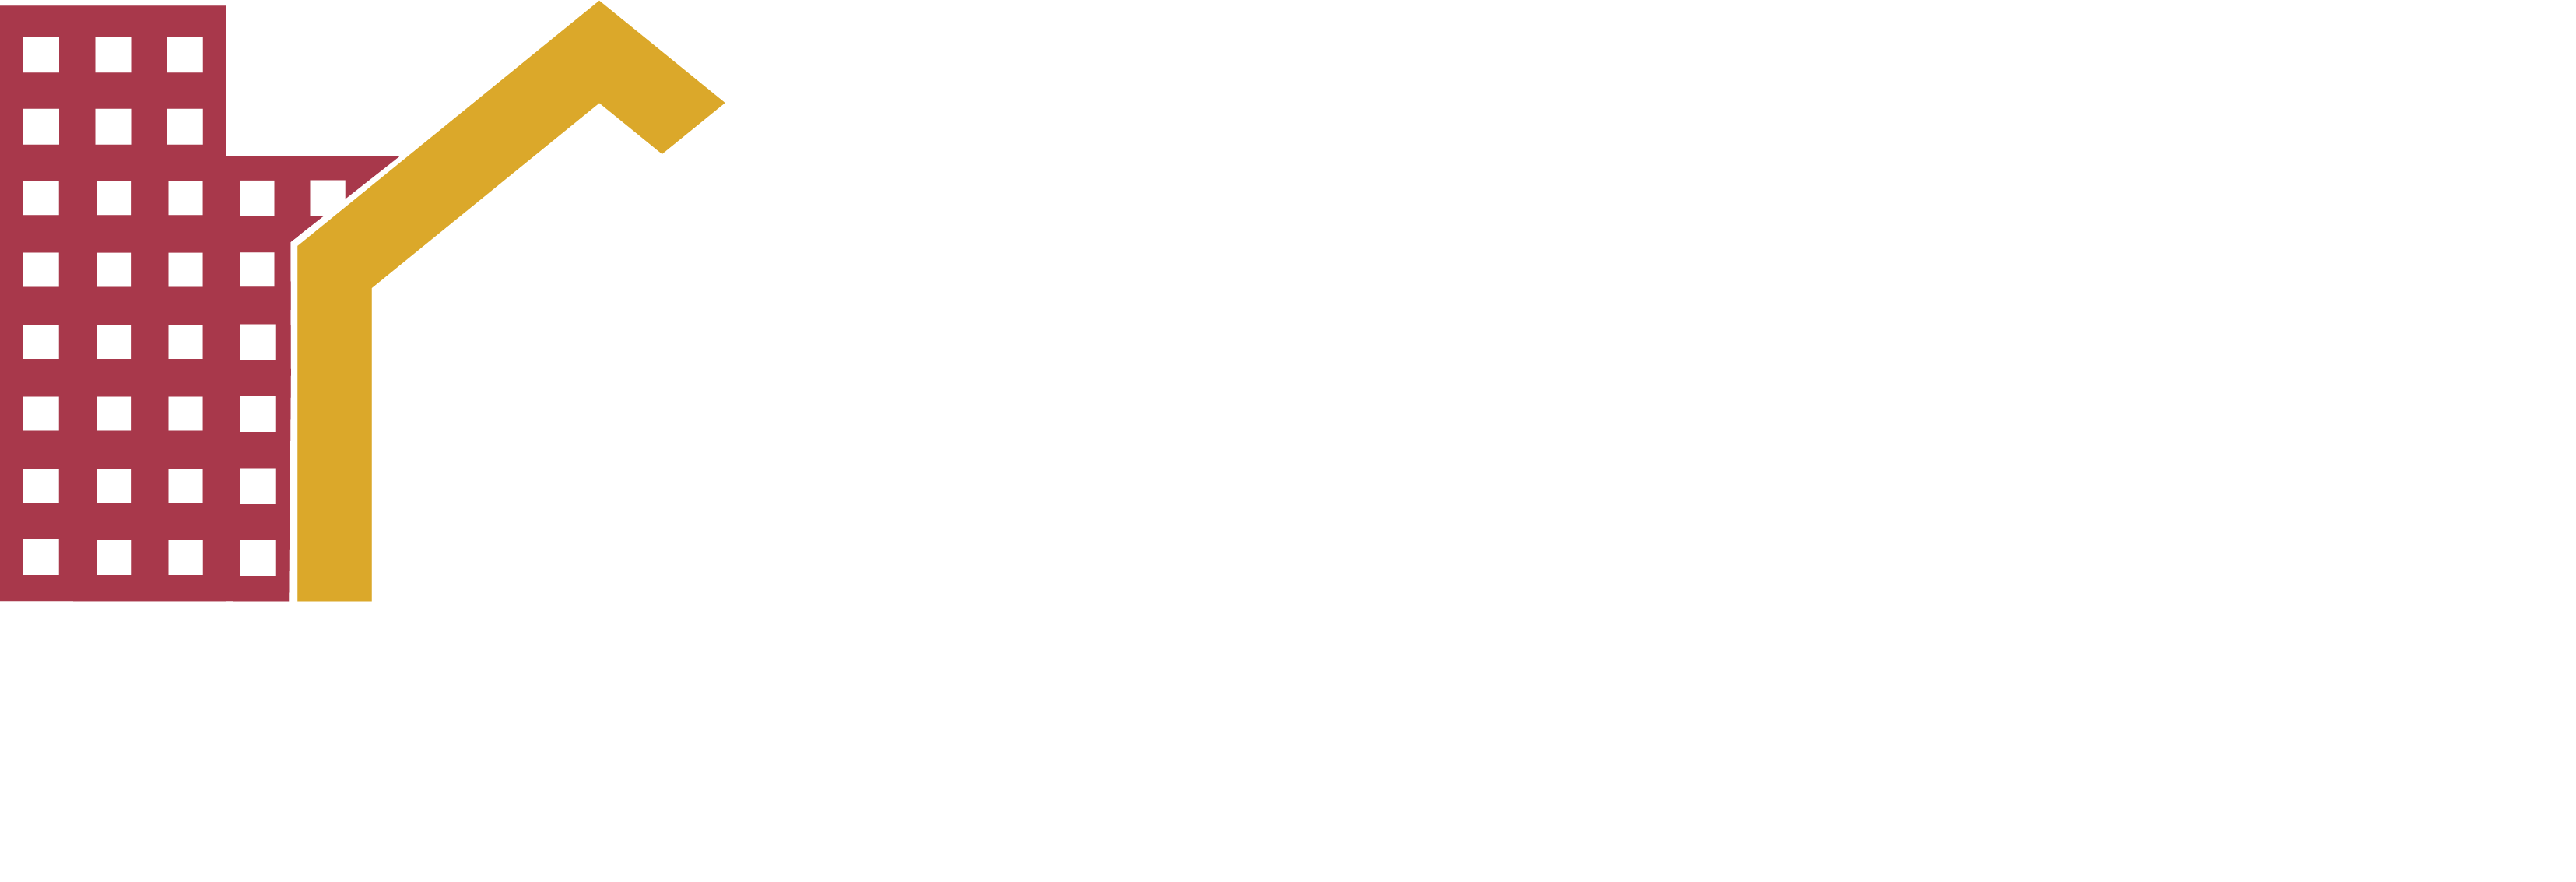 The Propking Realty